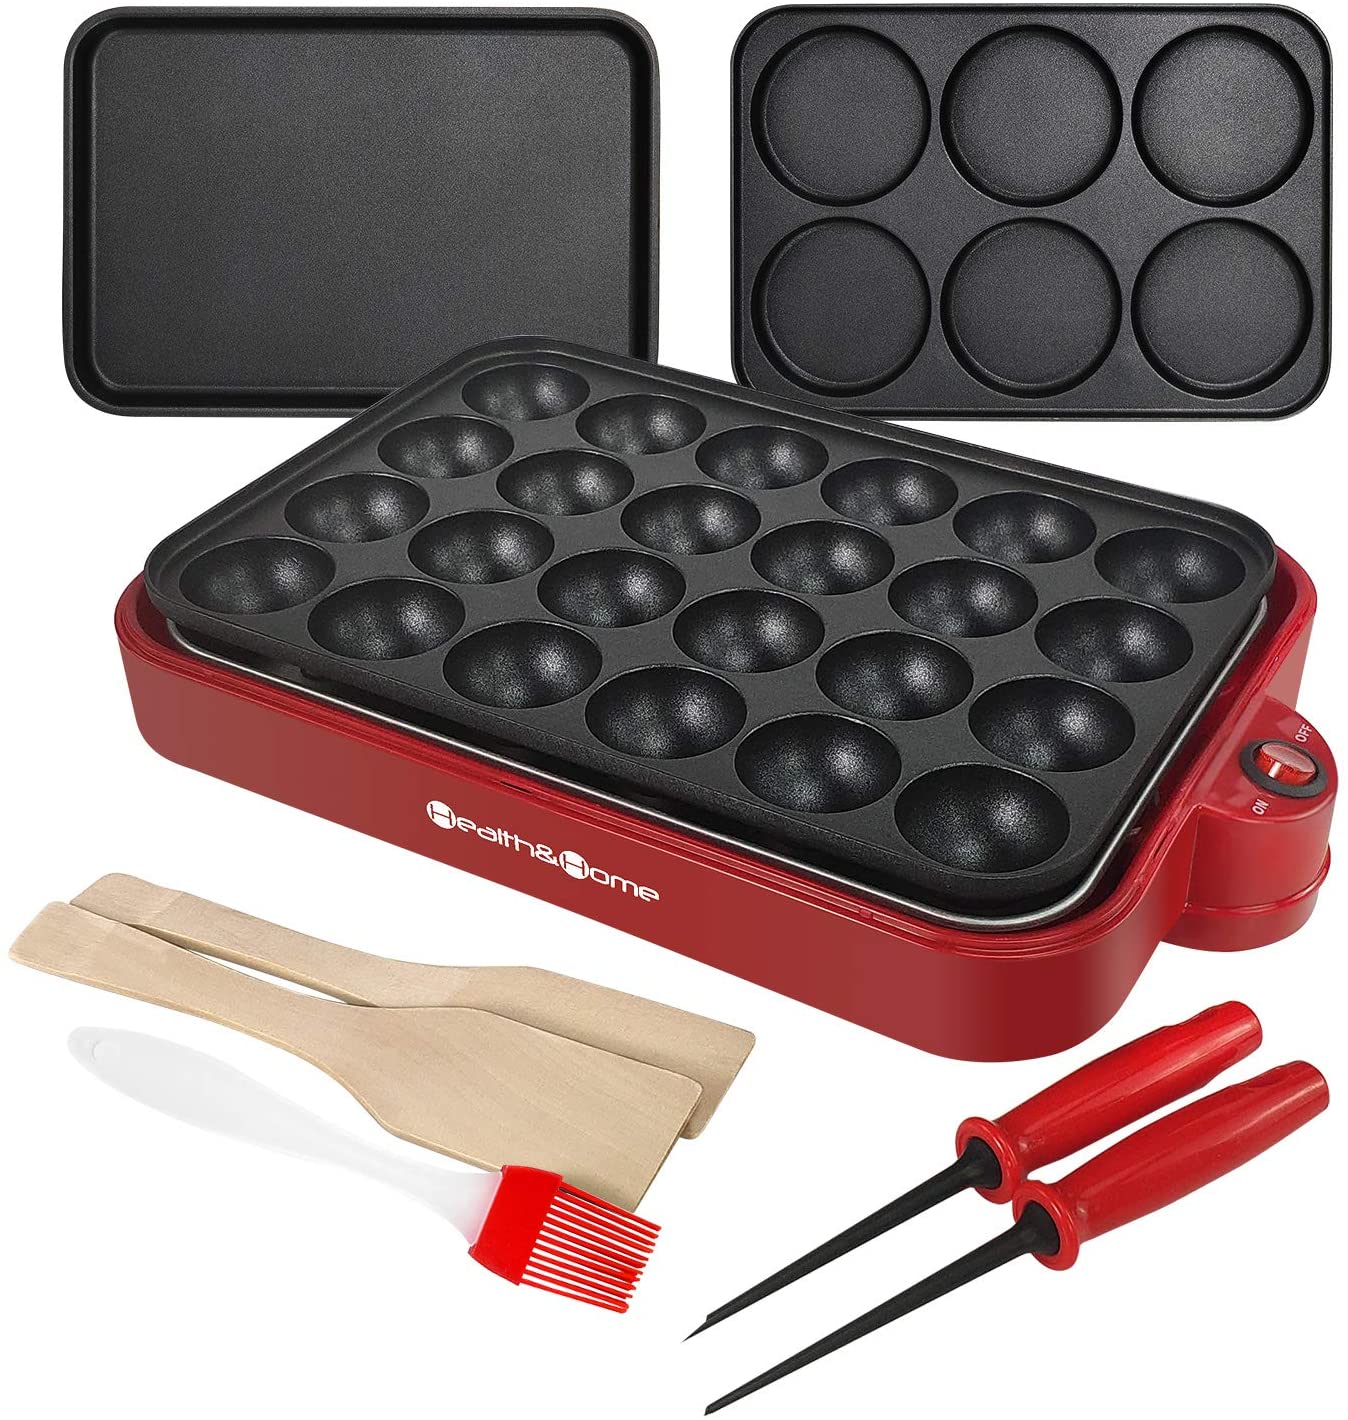 Multifunction Cake Pop Maker for Health and Home